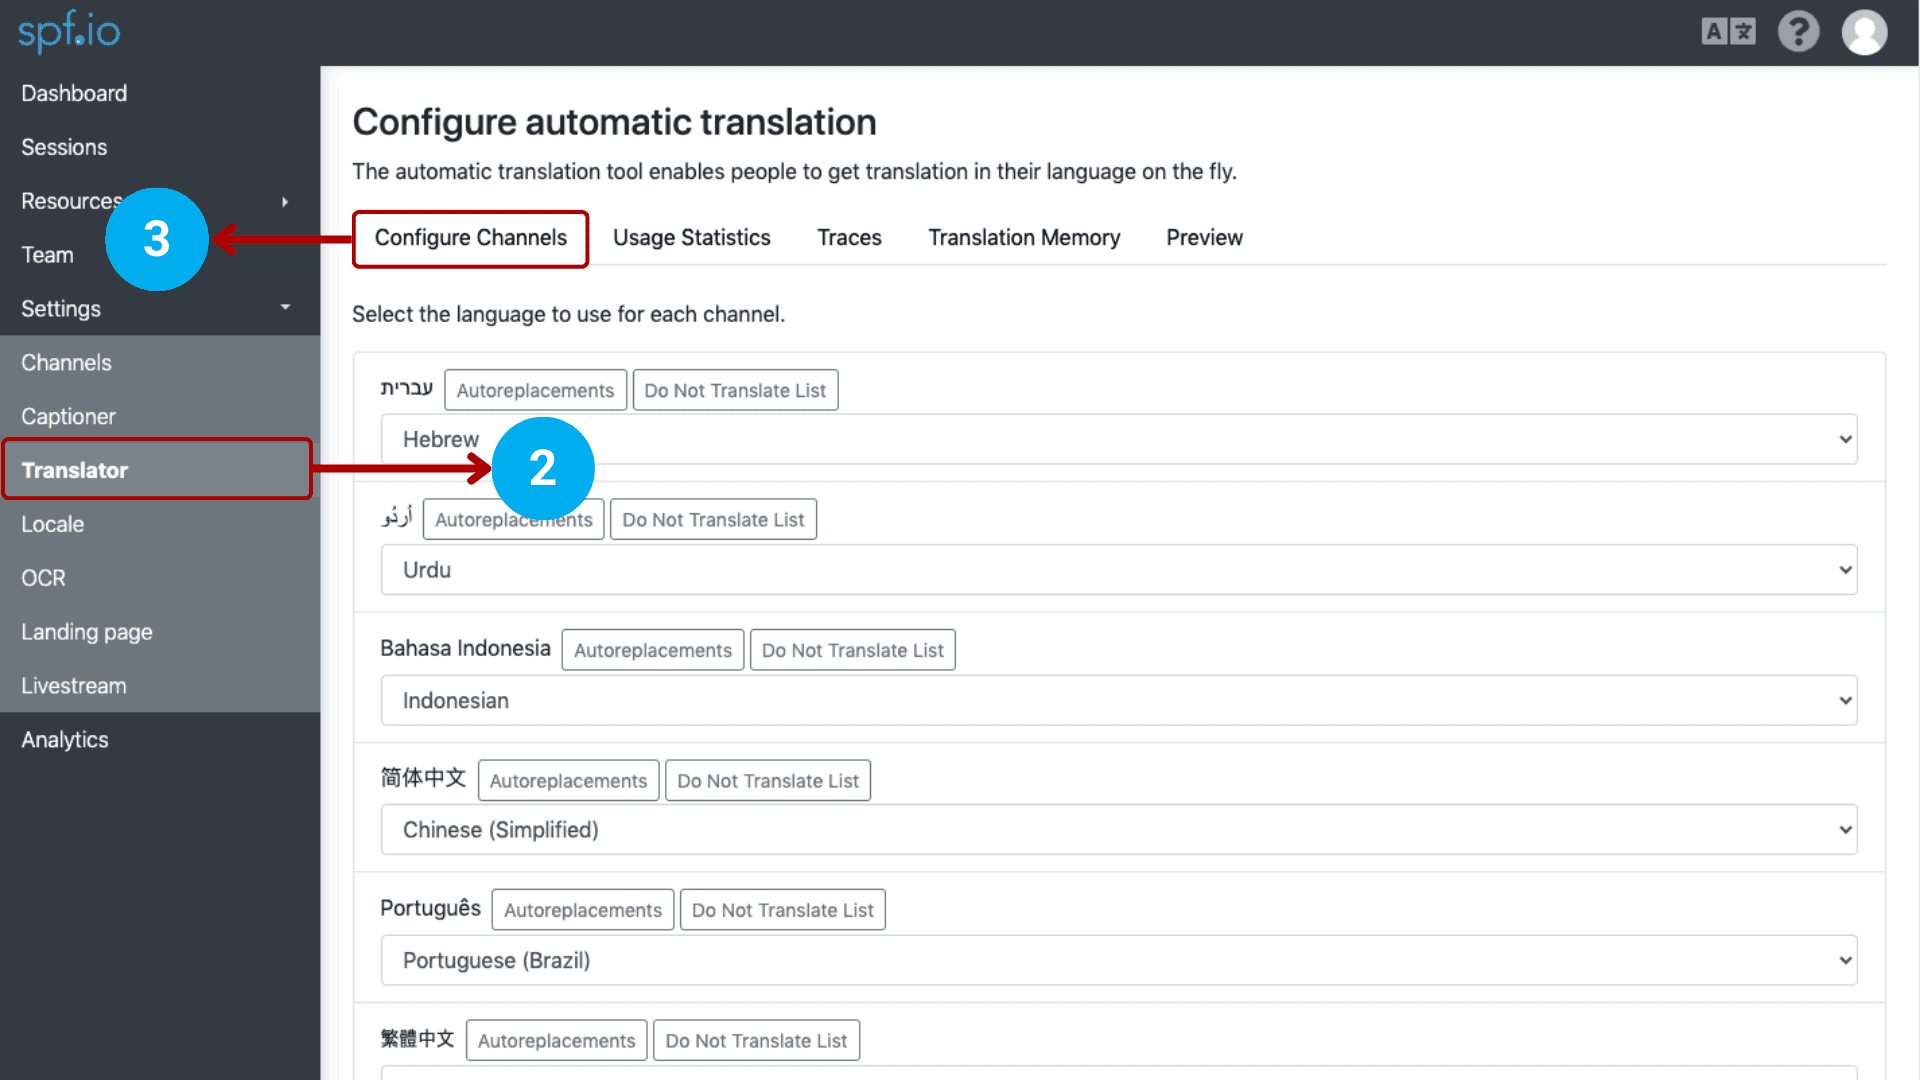 Go to the Translator settings and select Configure channels